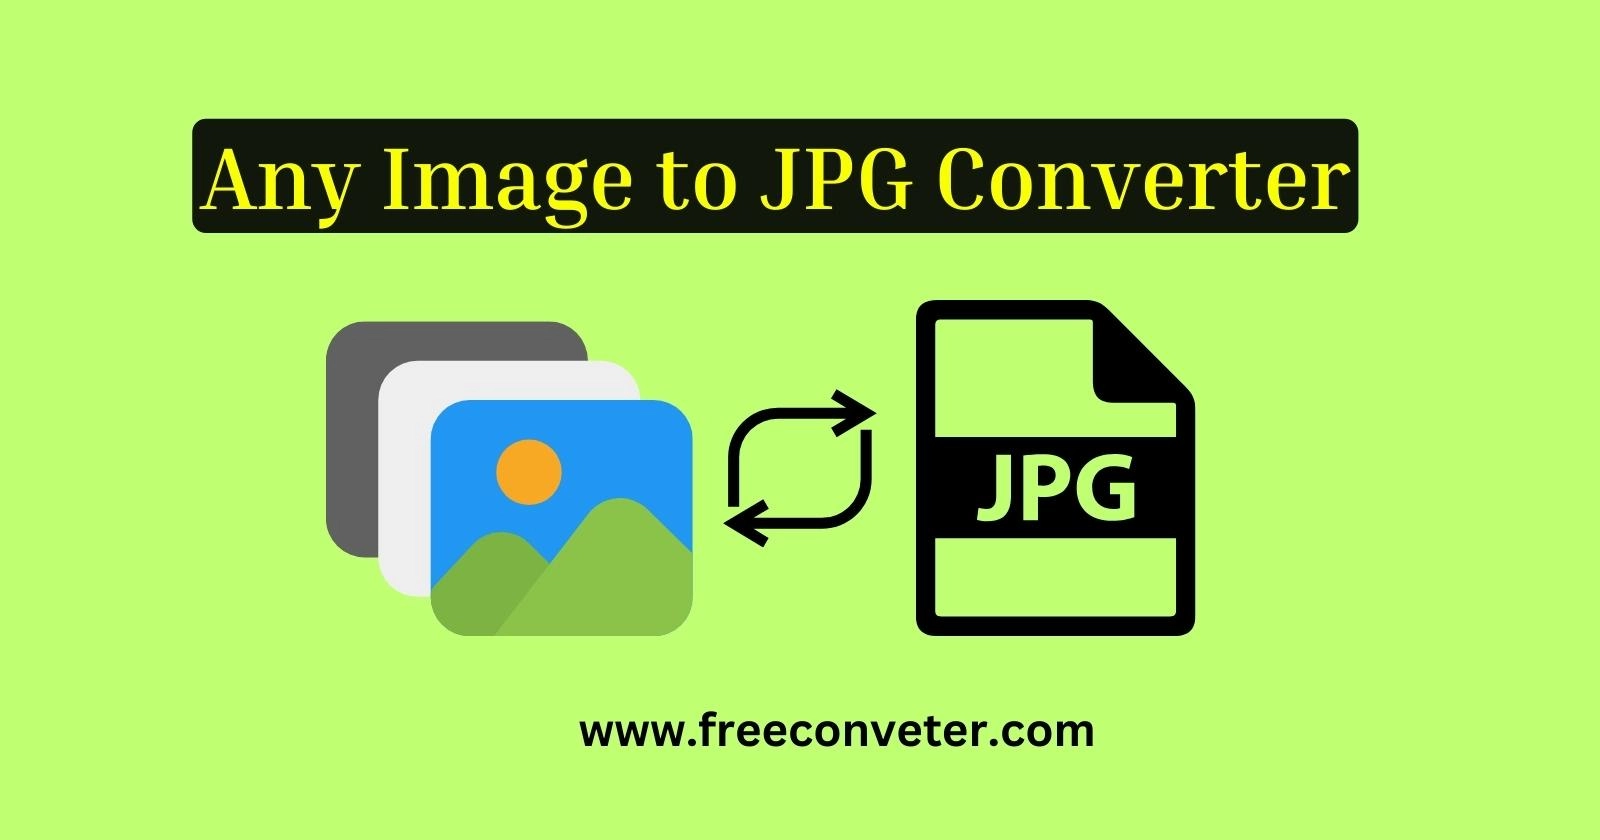 Any Image to JPG Converter